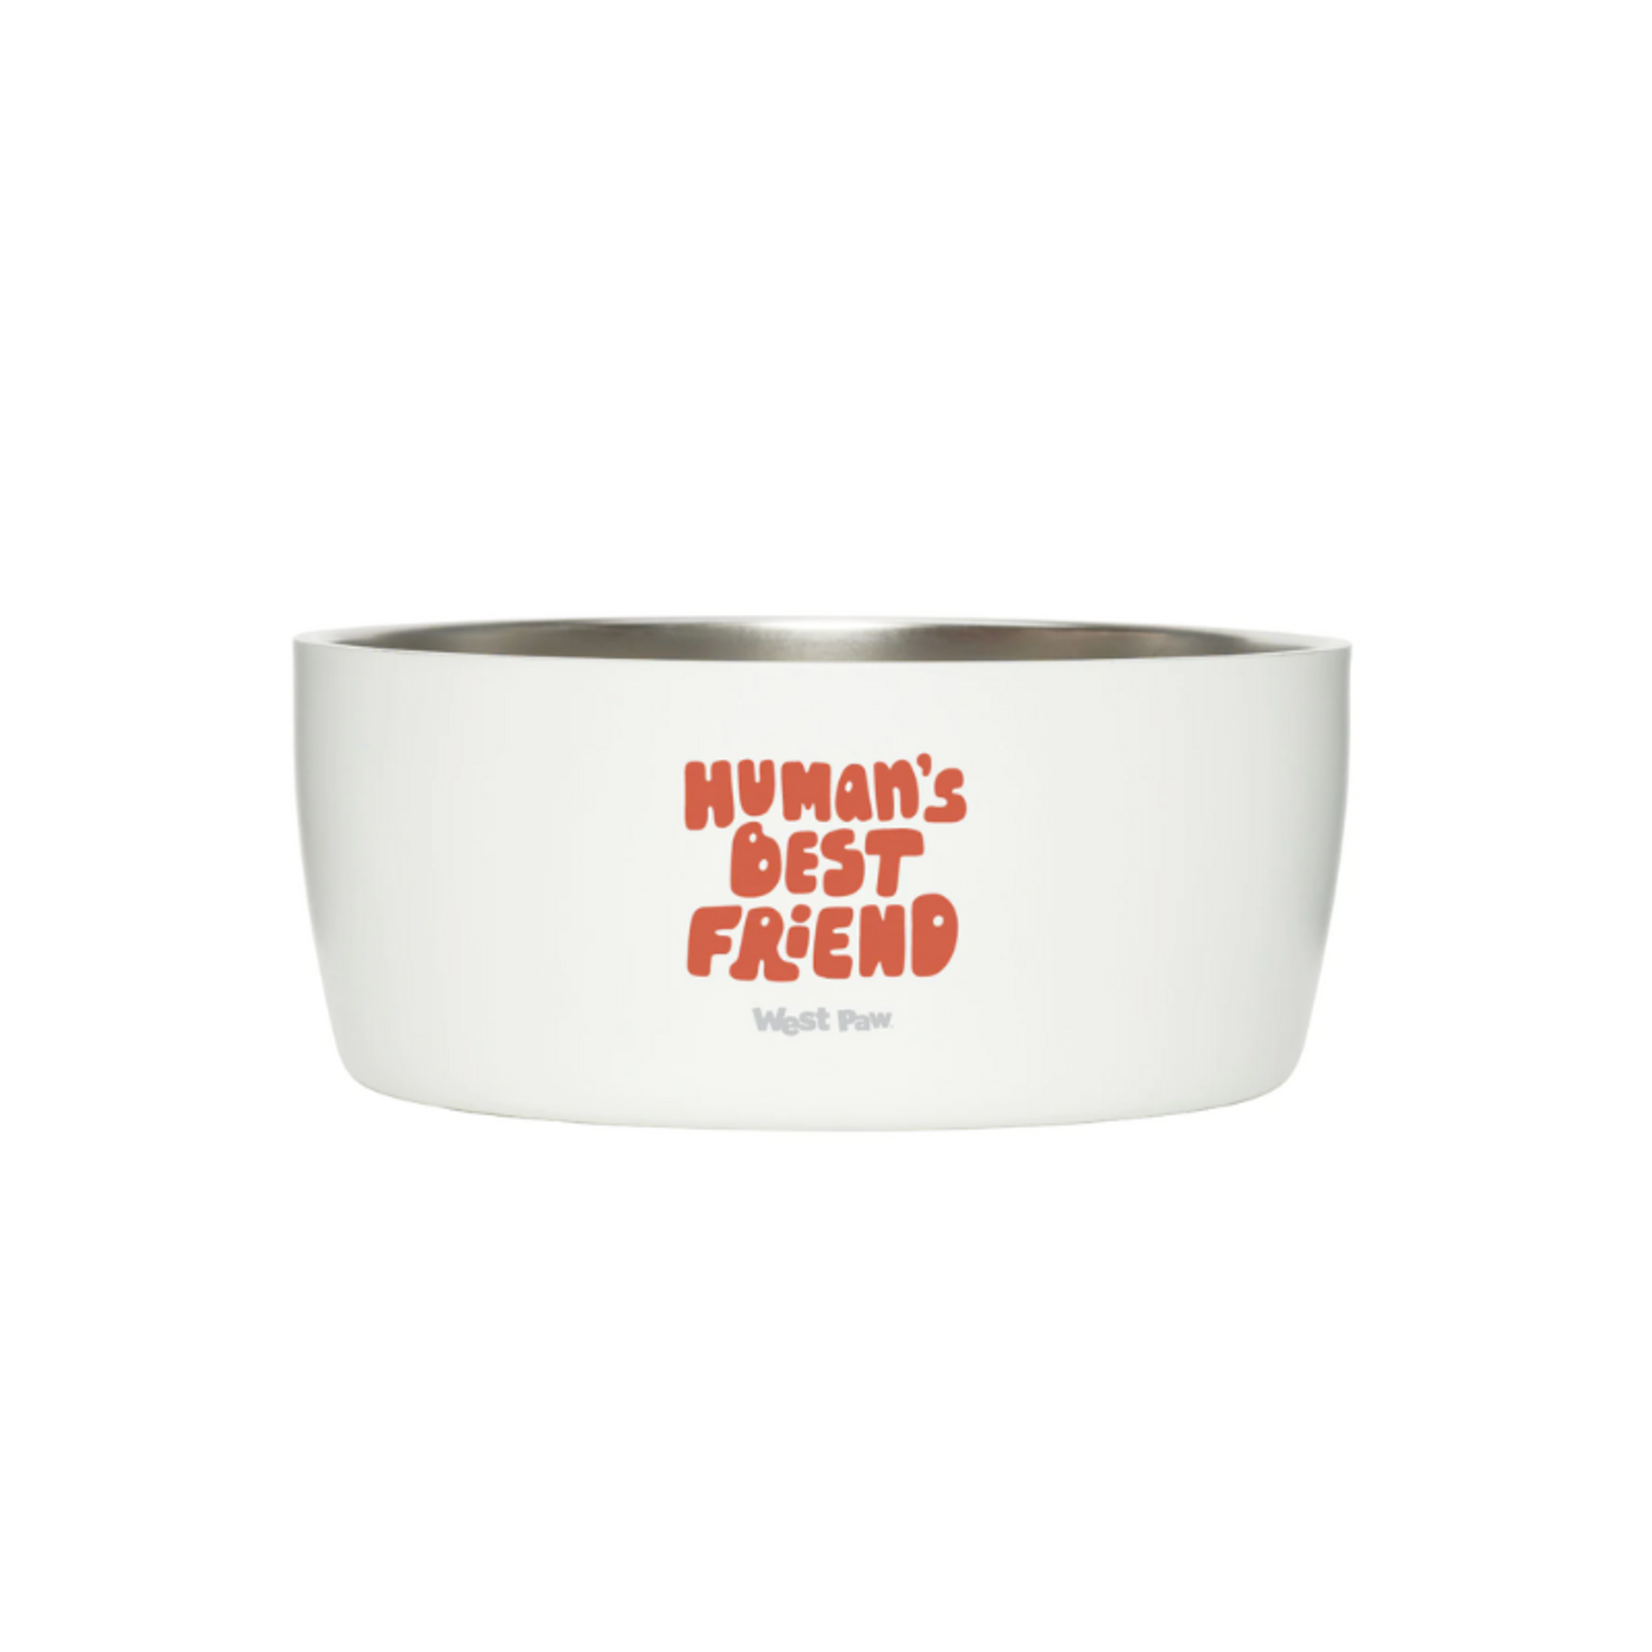 West Paw 6 cups - "Human's Best Friend" - MiiR Stainless Steel Bowl - West Paw Design